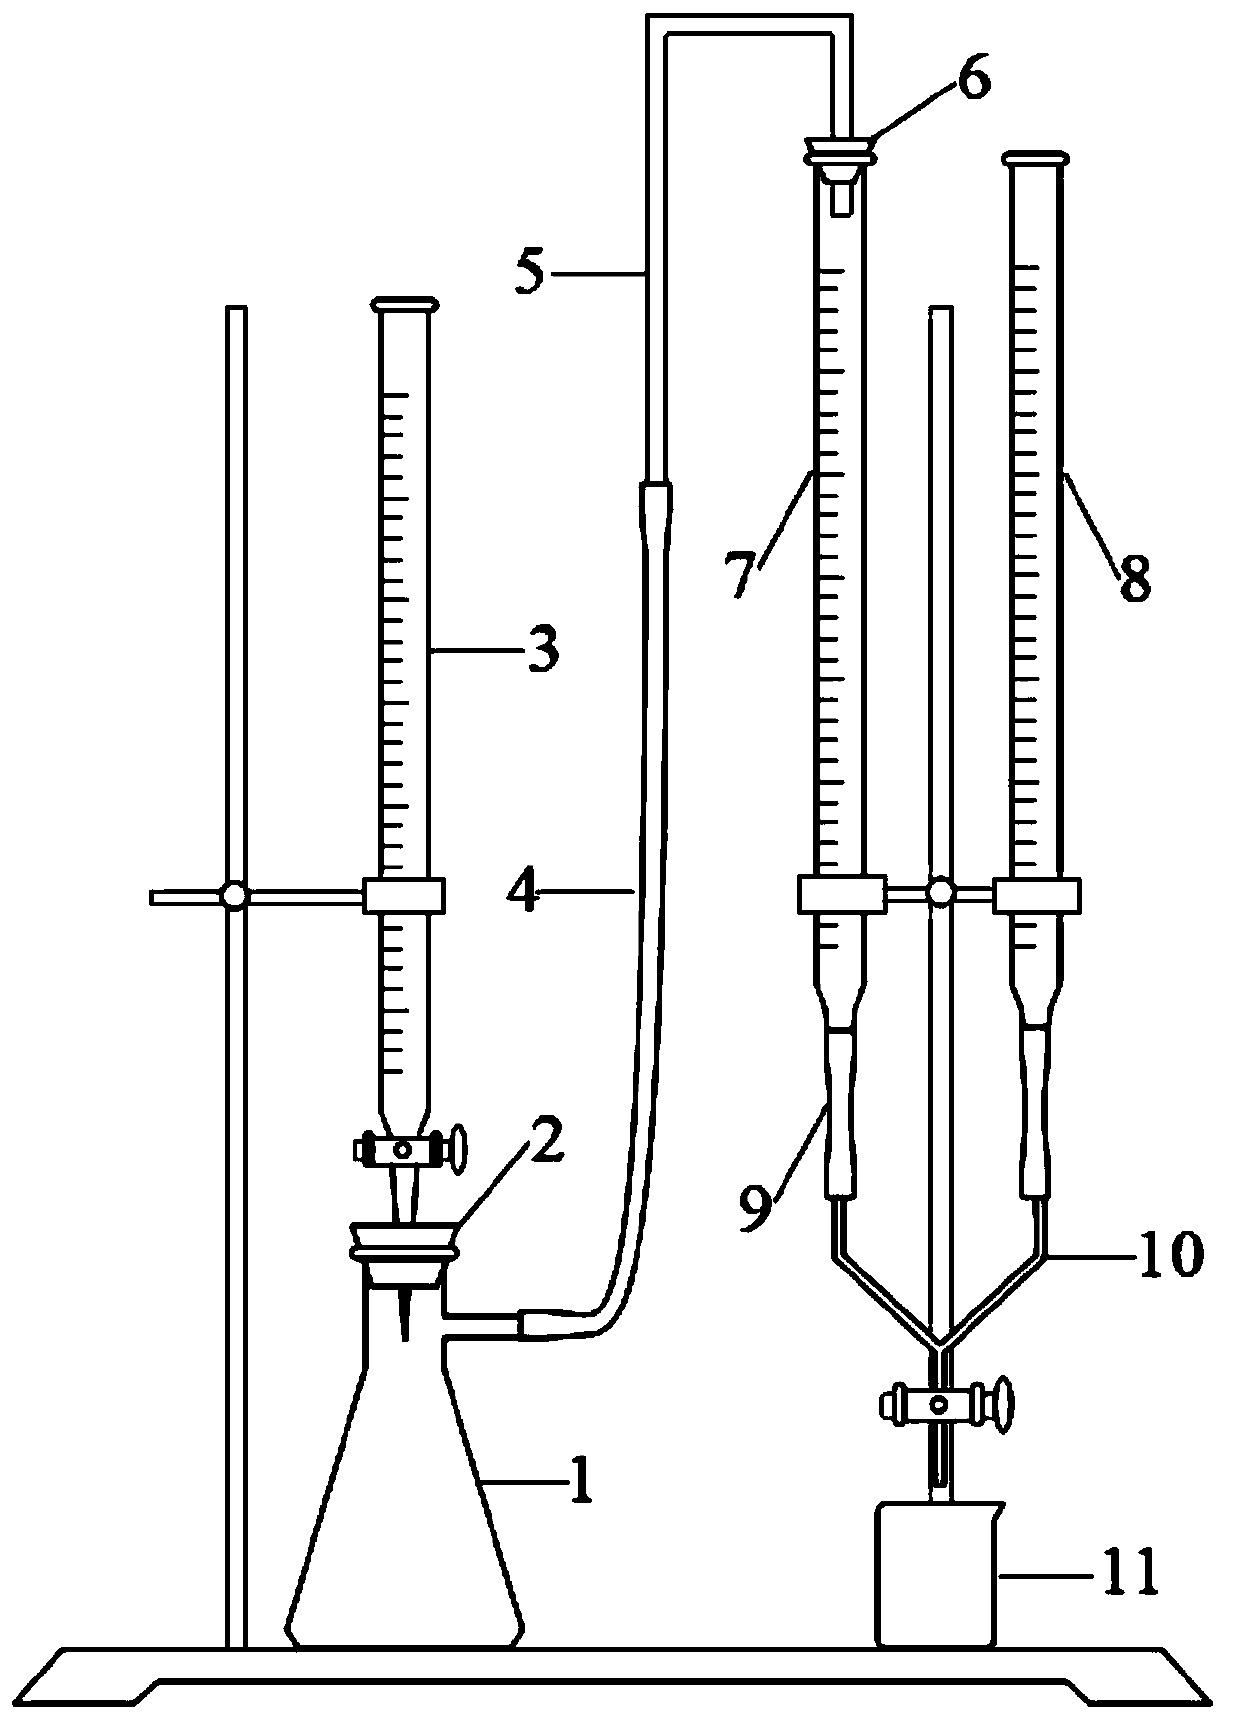 Experimental device for measuring content of carbonate in soil and operation method